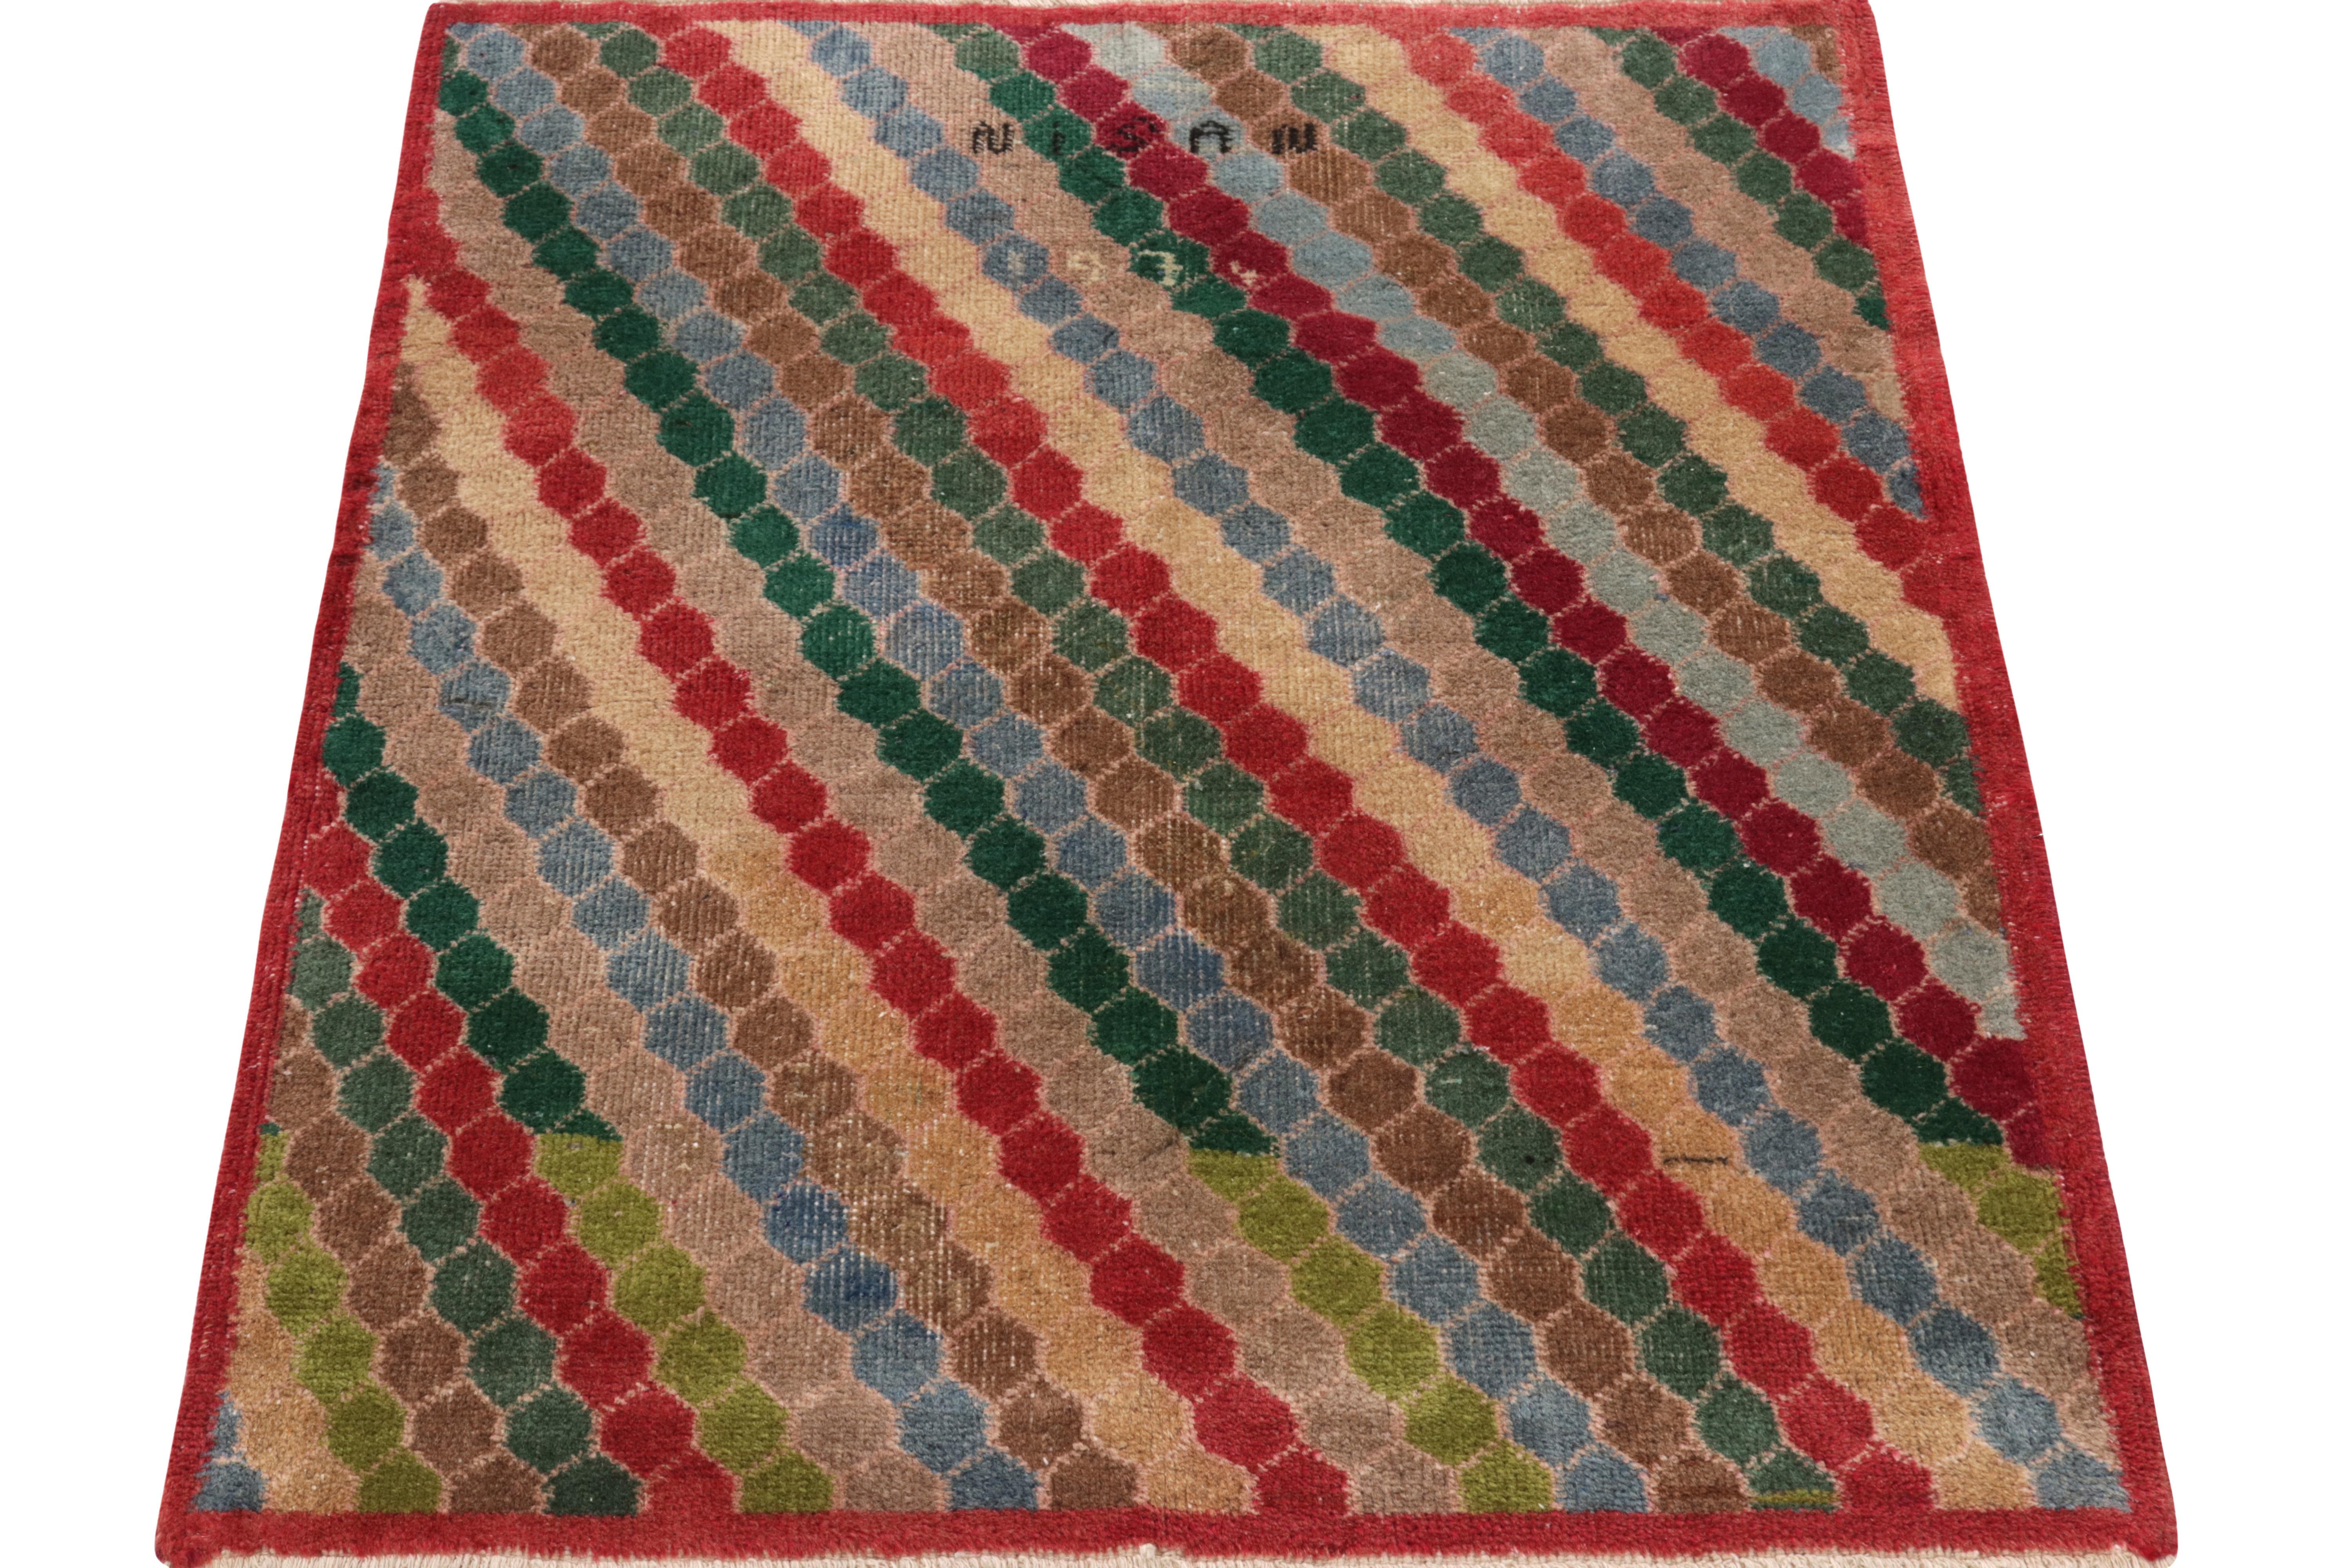 From Rug & Kilim’s Mid-Century Pasha collection, a 1970s vintage rug celebrating the works of a bold designer from Turkey. 

Exemplifying the artist’s unique take on Turkish Deco sensibilities, this rare signature piece from the artist enjoys an